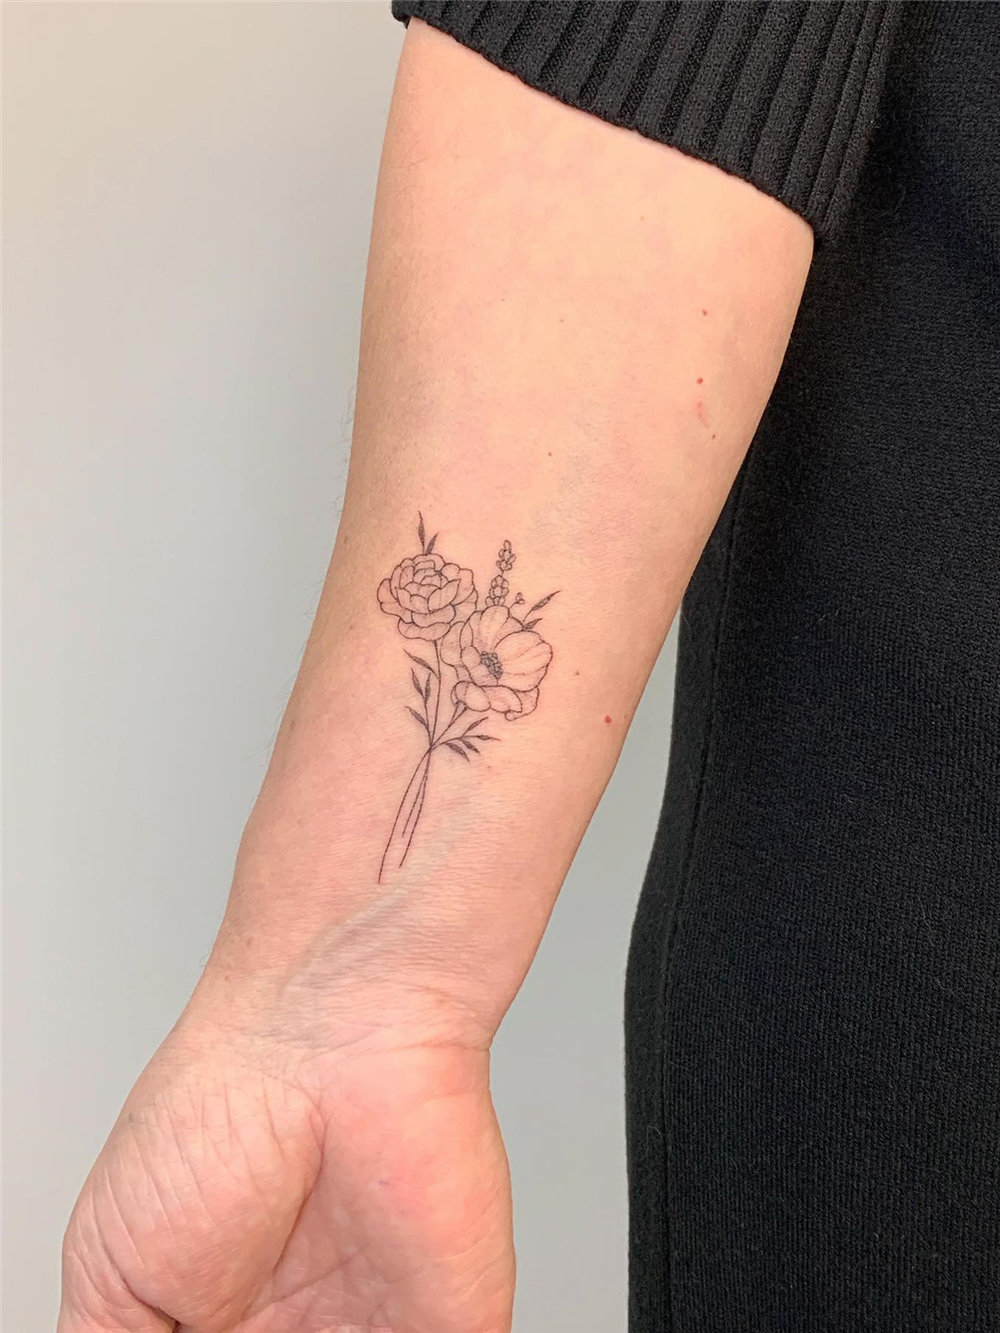 Delicate Floral Tattoo on Wrist for Women